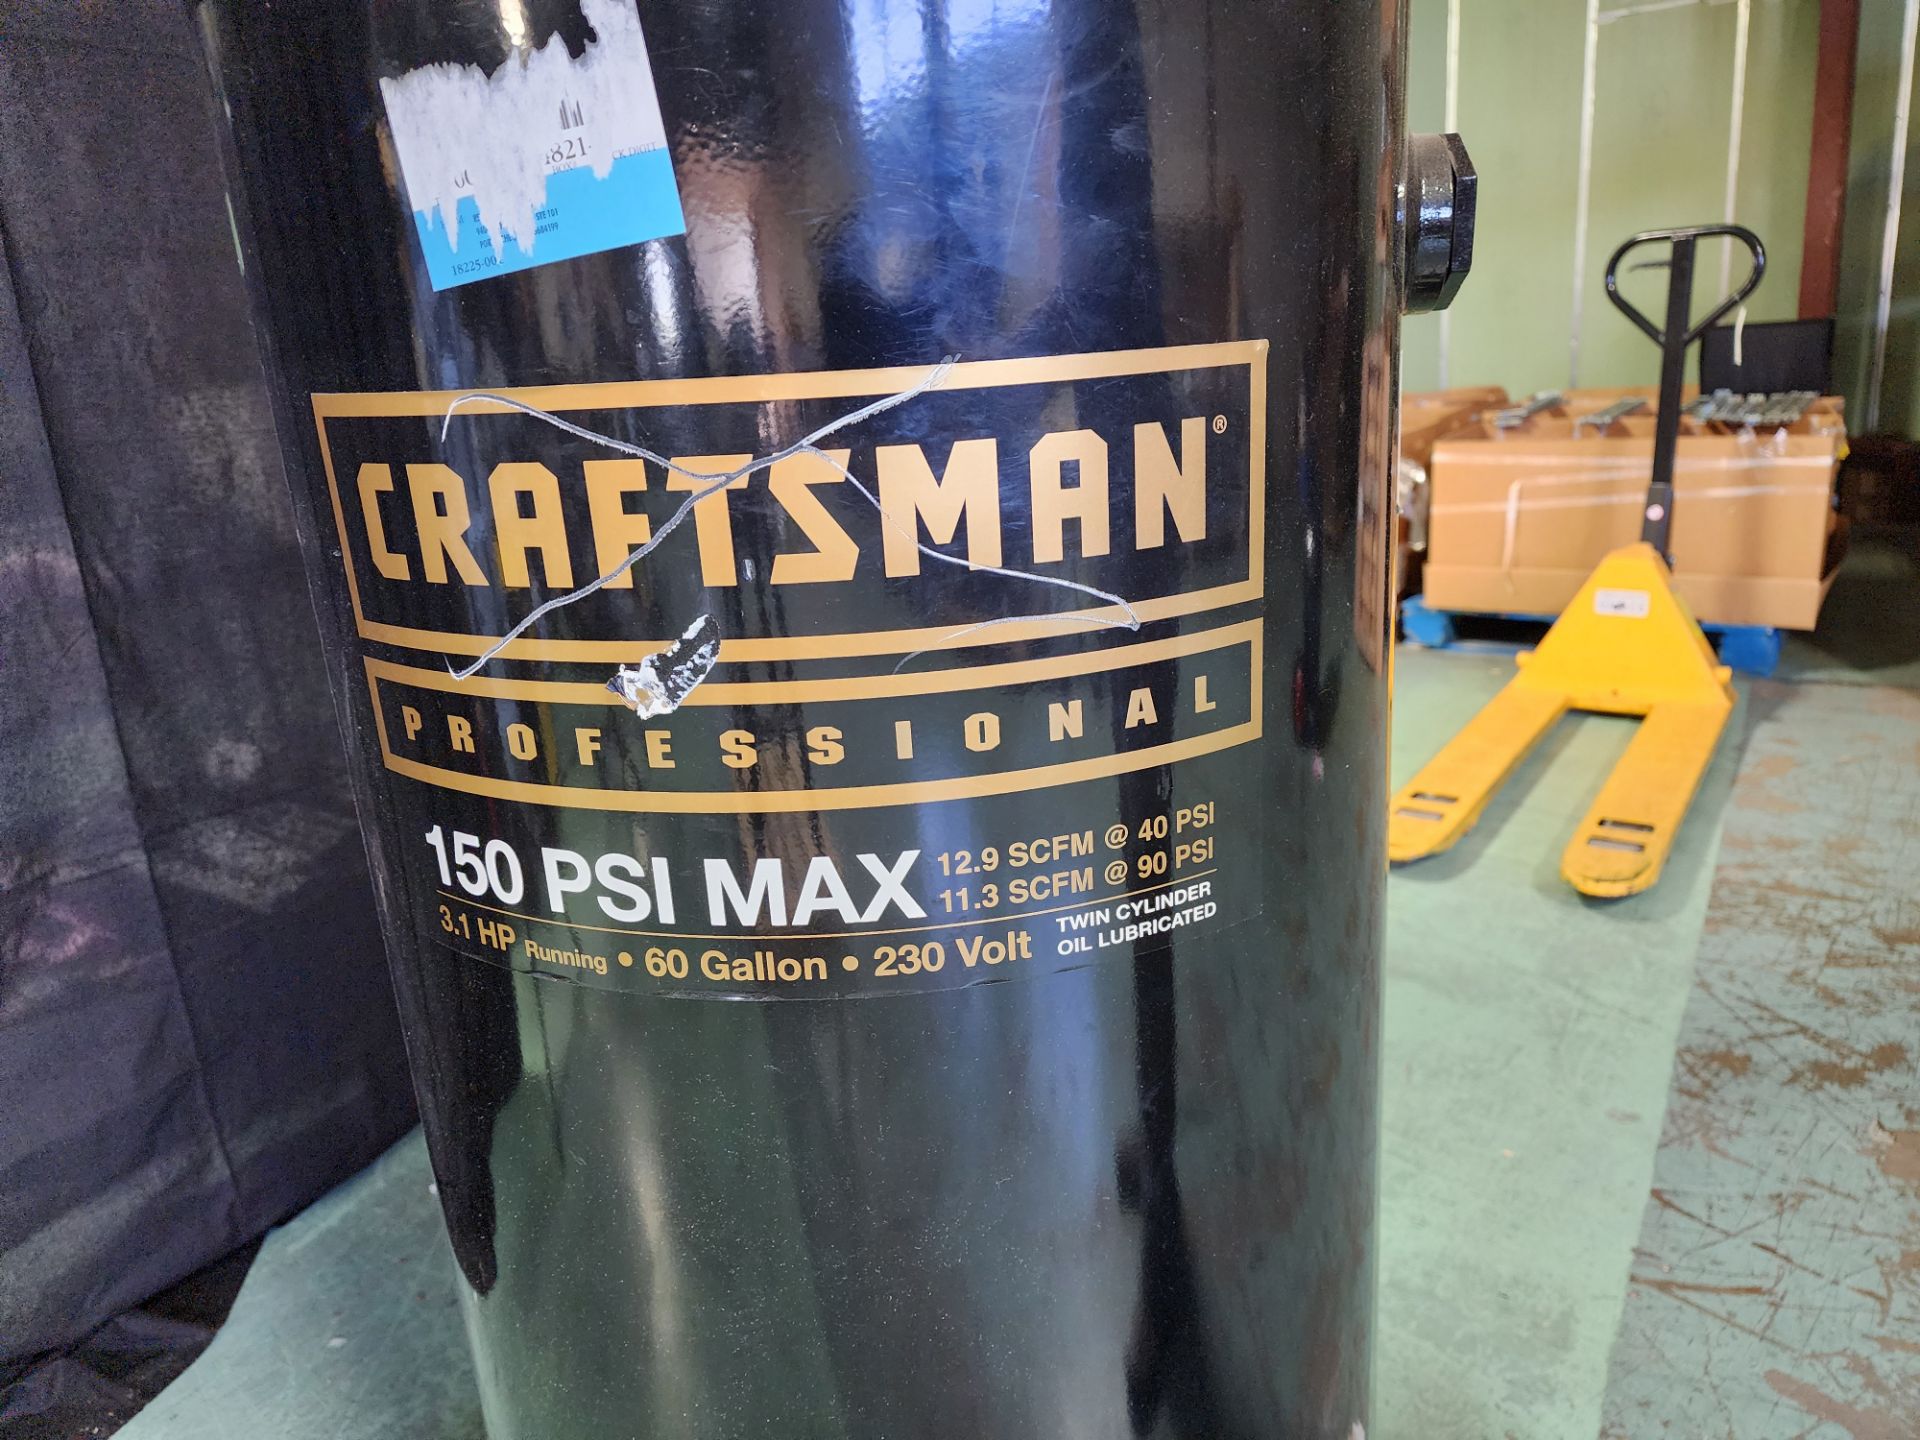 Craftsman Professional Air Compressor - LISTED AS "SALVAGE": 150 PSI, 240 Volt, 3.1 HP, 60 Gallon - Image 9 of 11